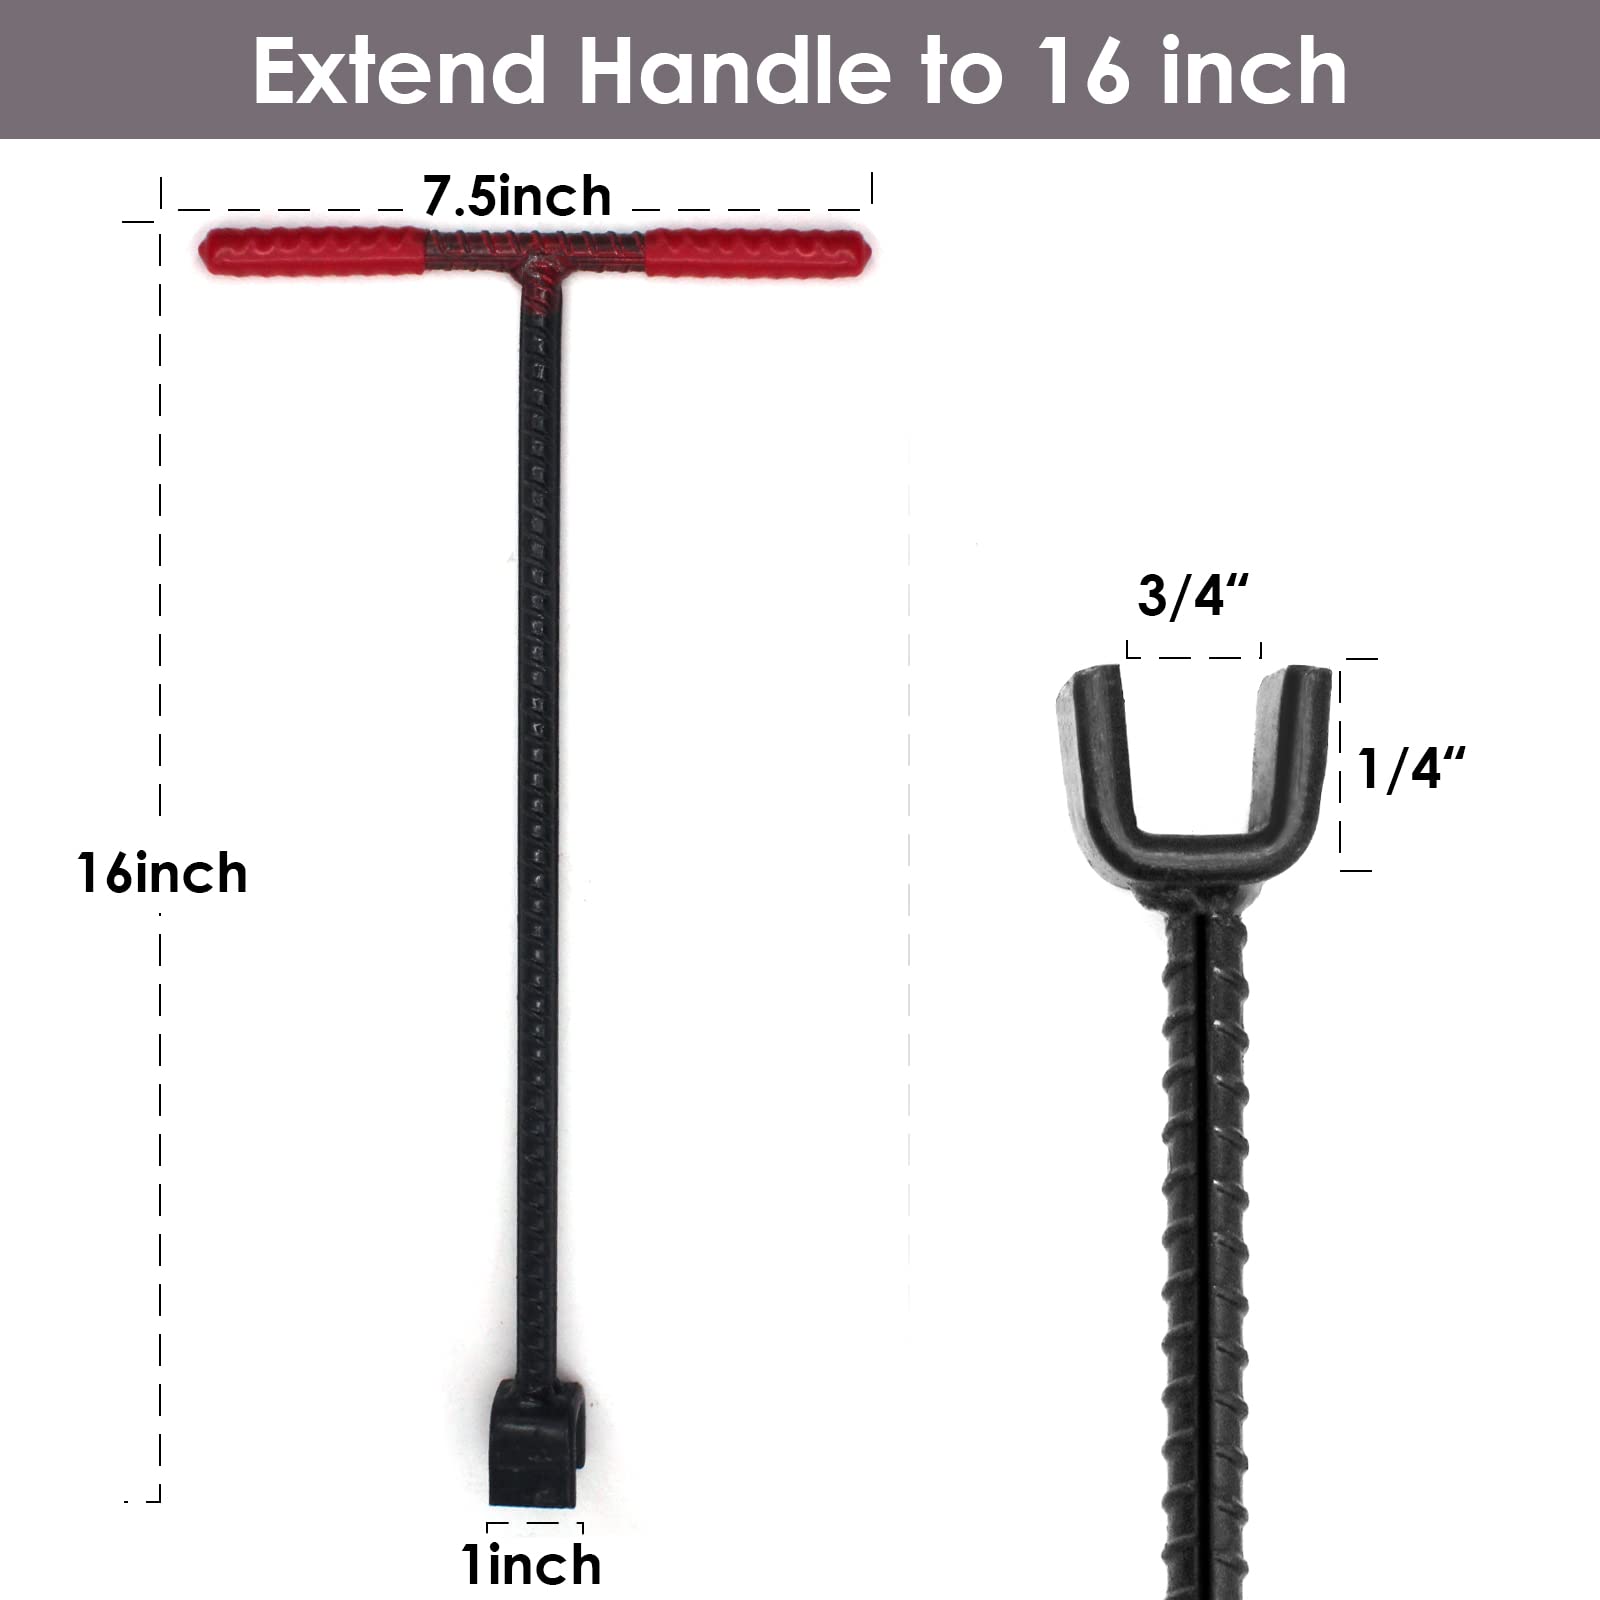 Water Meter Key Wrench 16 Inch Enforced Steel T-Handle - 4-way Contractor Grade Curb Valve Tool